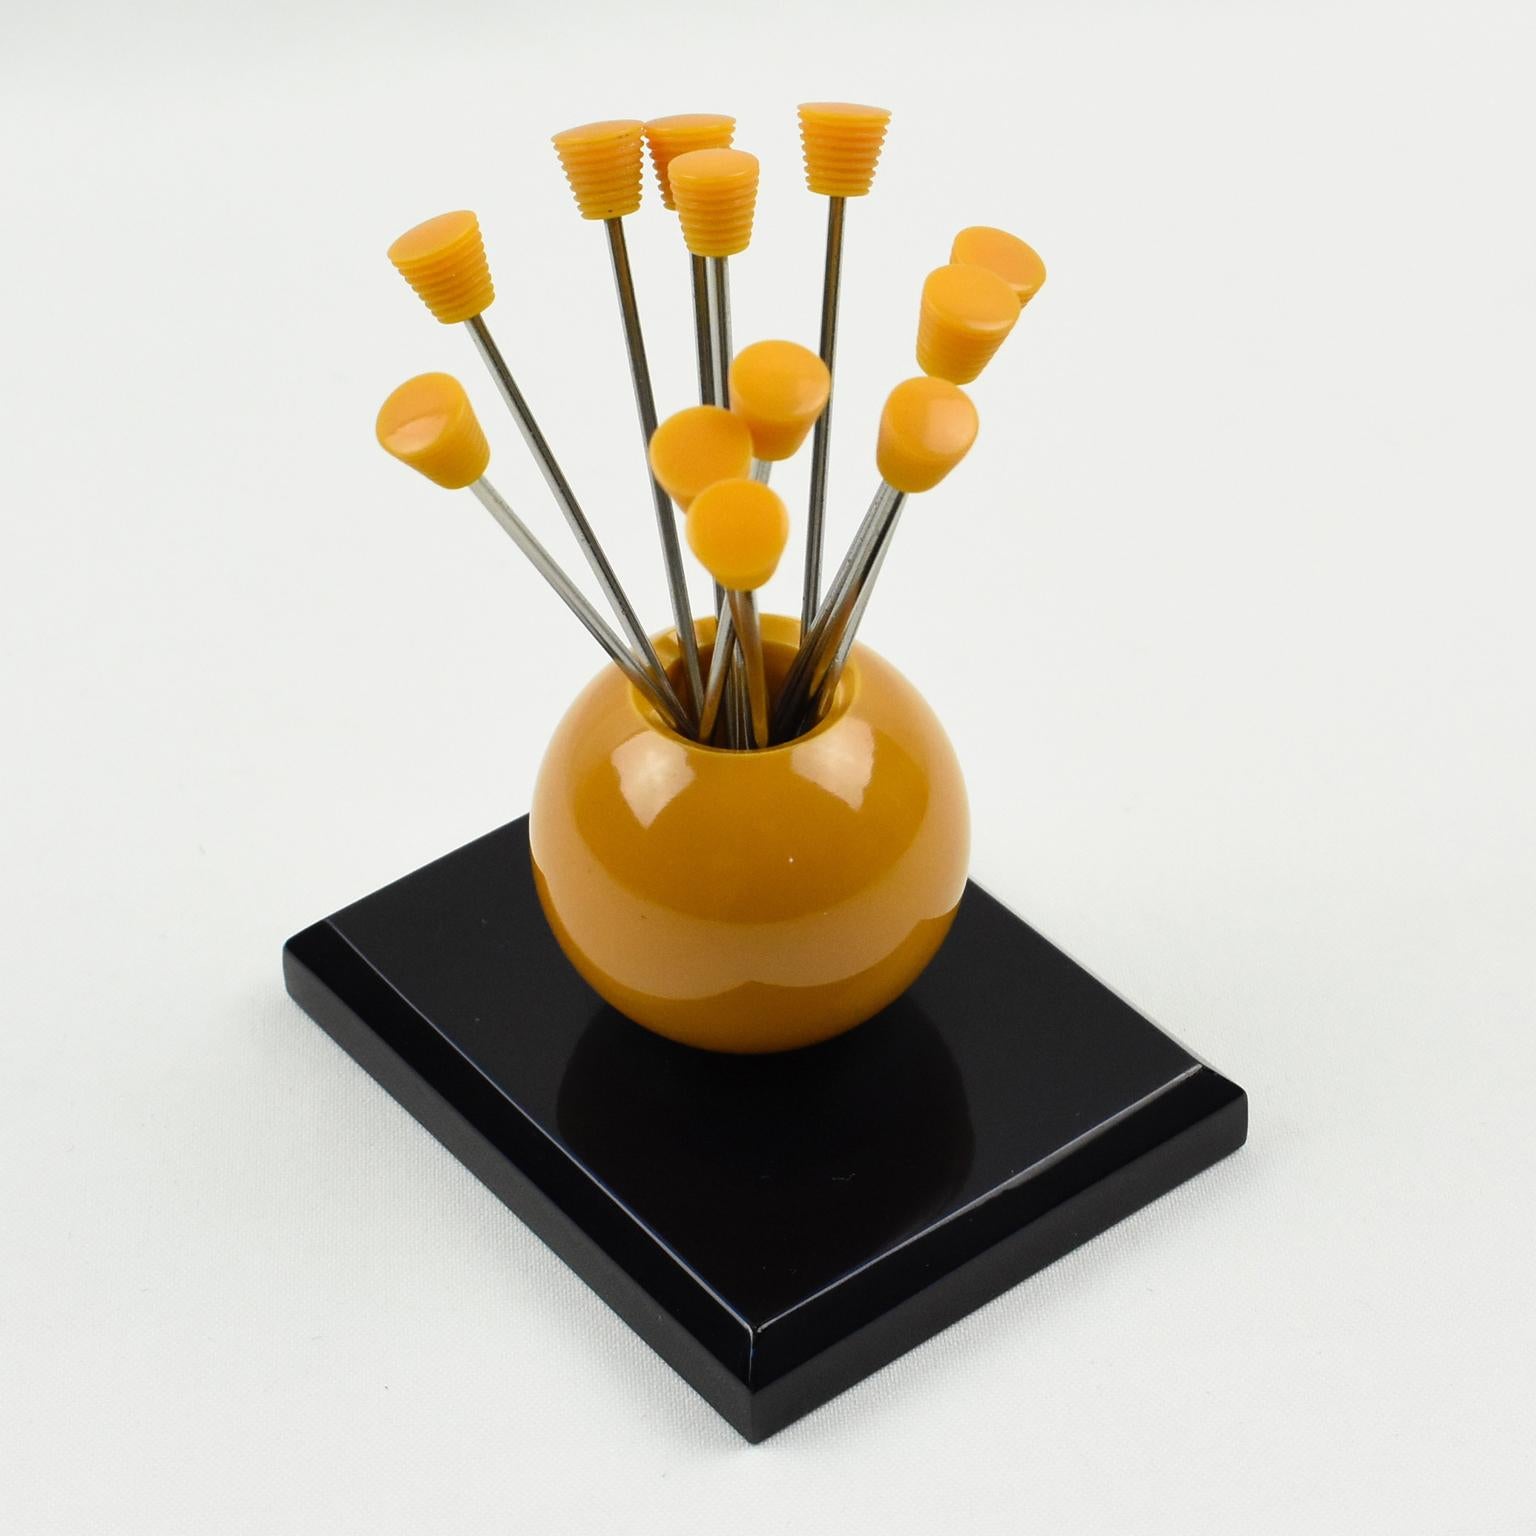 Lovely set of cocktail picks with geometric design. Twelve forks with orange carved Bakelite finial can be removed from the central holder and be used as cocktail picks for Manhattan's, Martinis or any other cocktail that requires a garnish. Orange